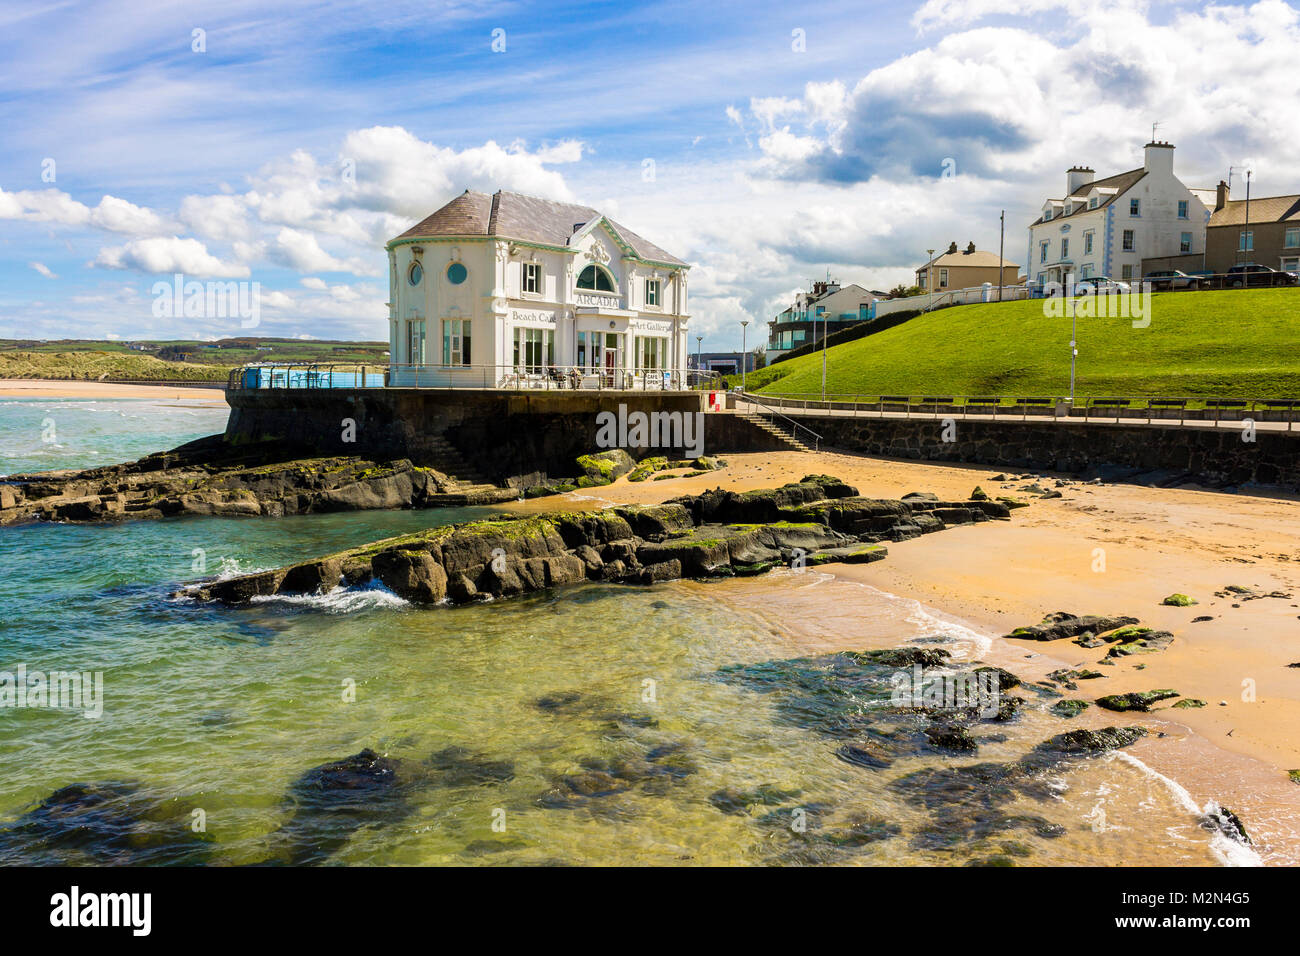 The Arcadia, a historic cafe and ballroom in the coast of Portrush, a small seaside resort town in County Antrim, Northern Ireland, United Kingdom Stock Photo